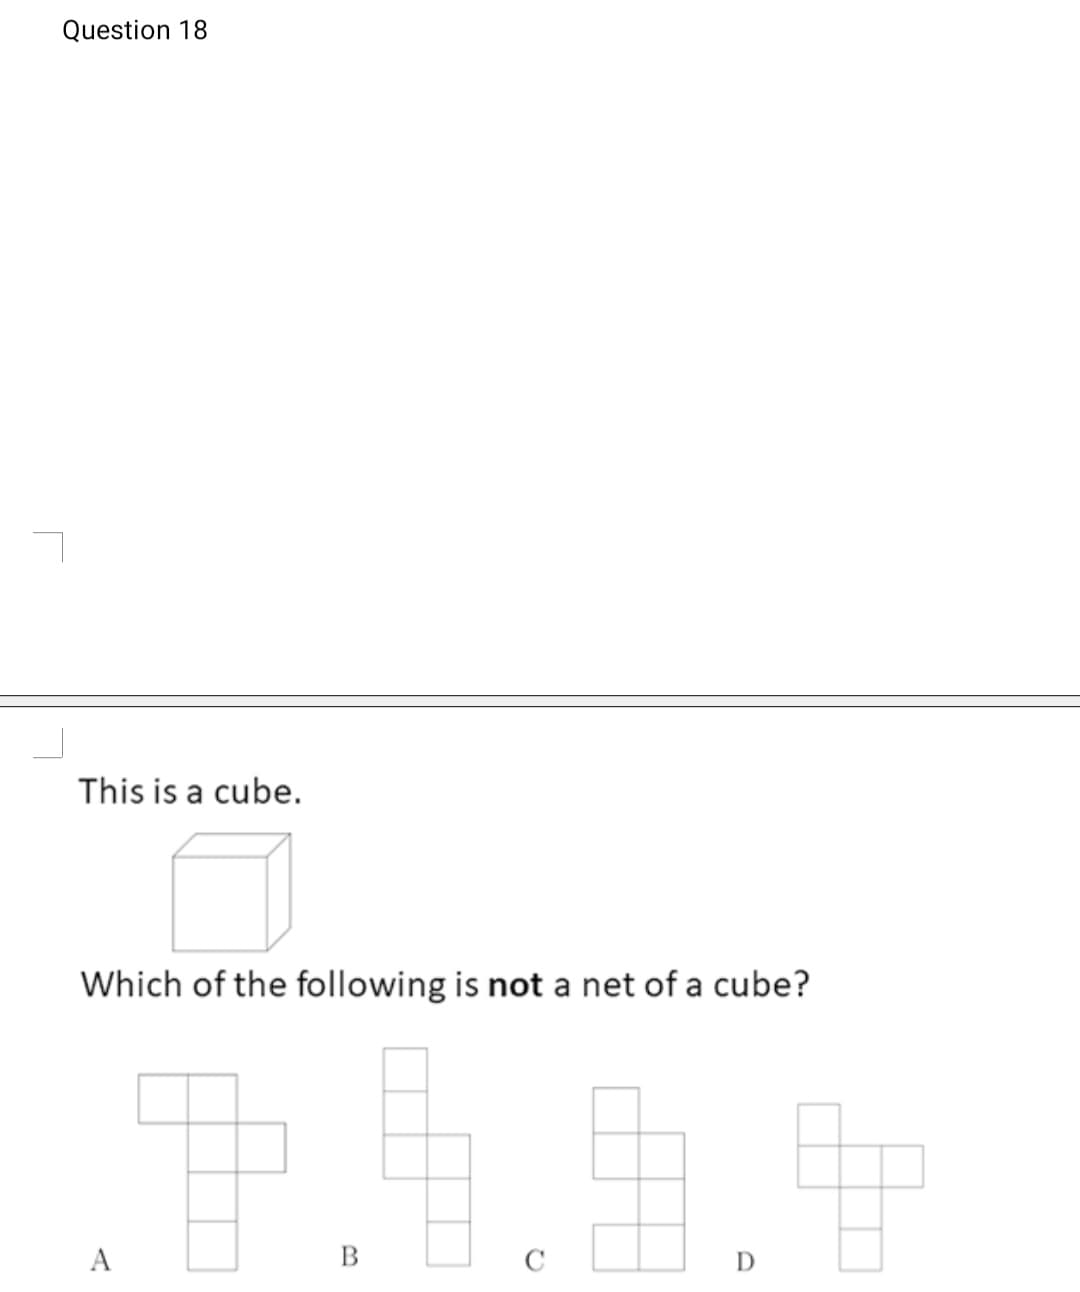 Question 18
This is a cube.
Which of the following is not a net of a cube?
A
C
D
